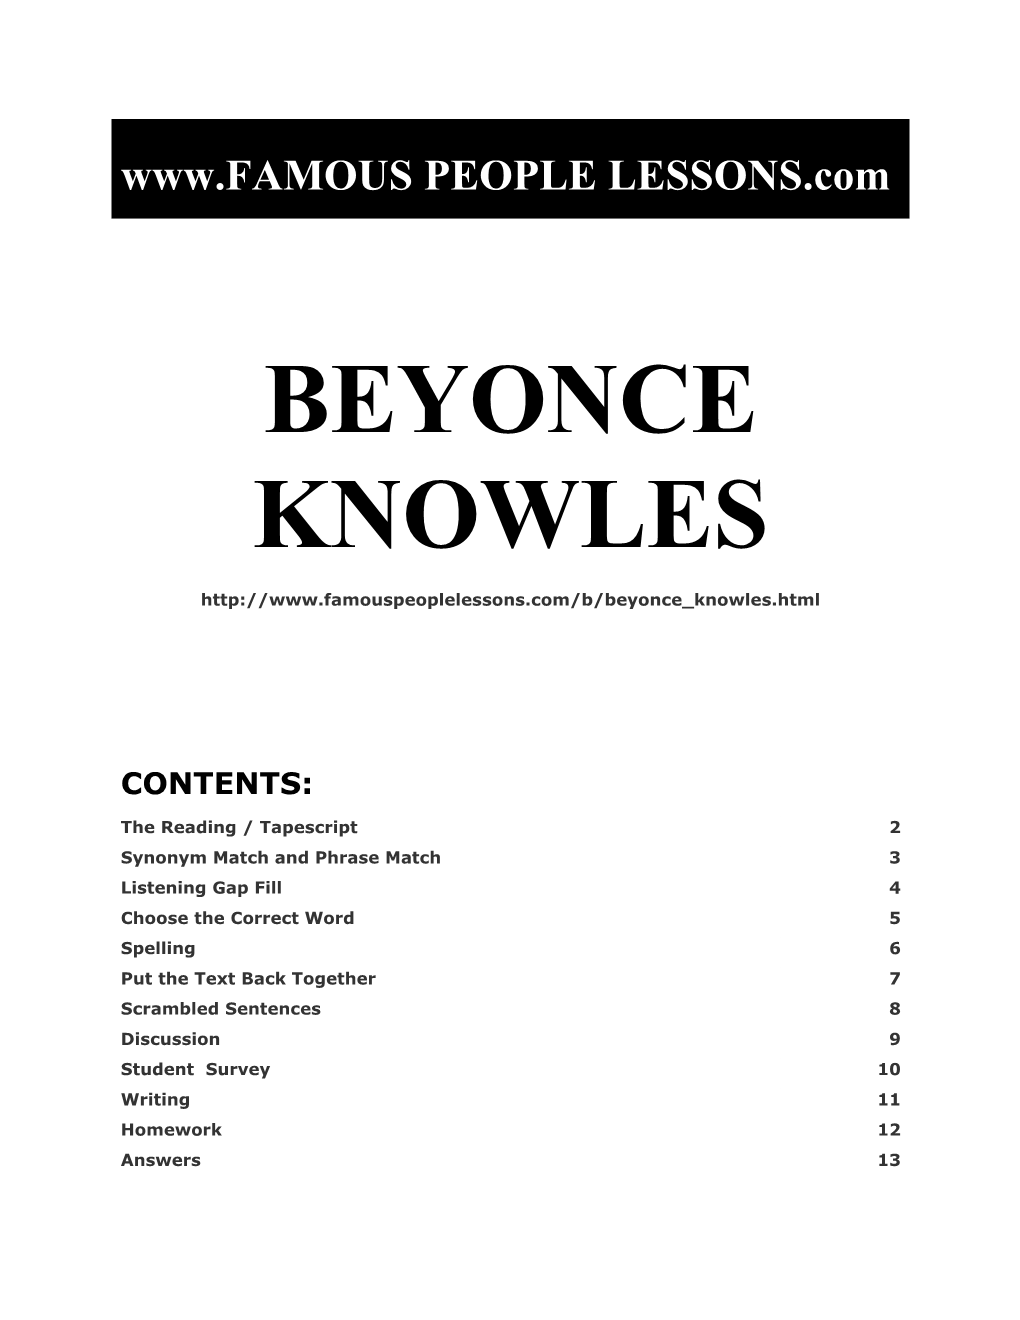 Famous People Lessons - Beyonce Knowles